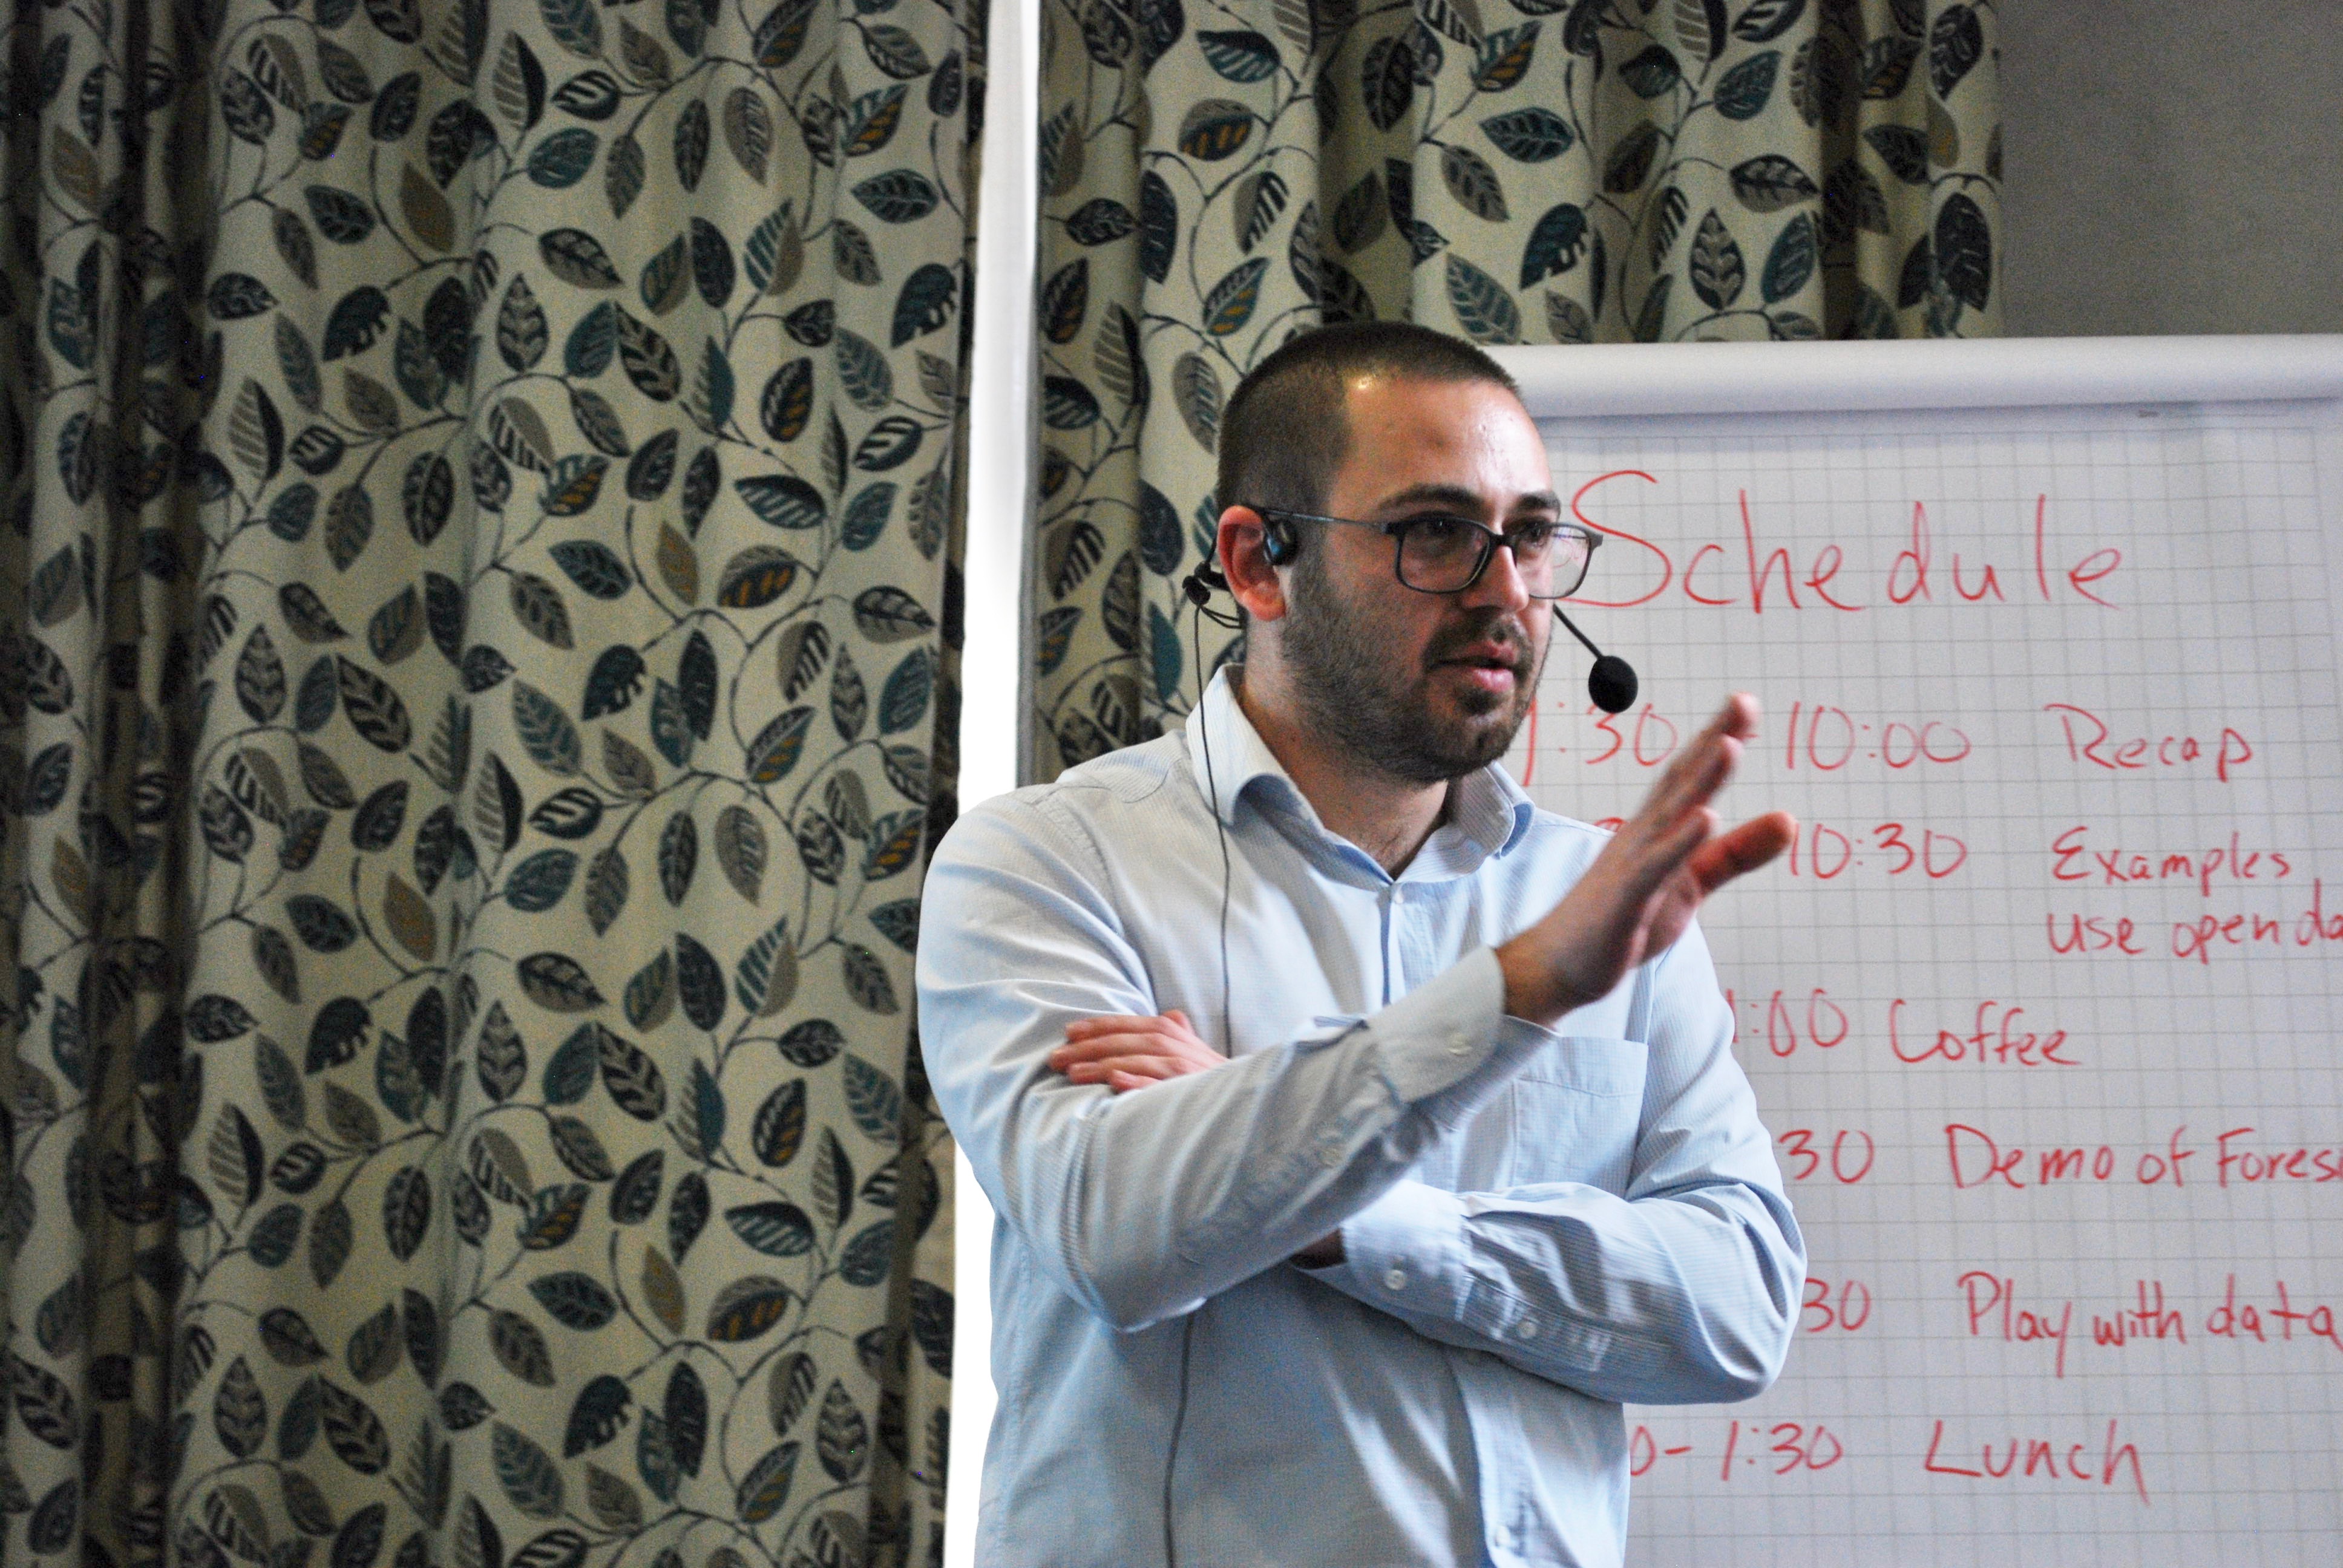 A civil society leader and data expert from Georgia discusses how to use open election data during February’s Election Data Academy in Kyiv, Ukraine.